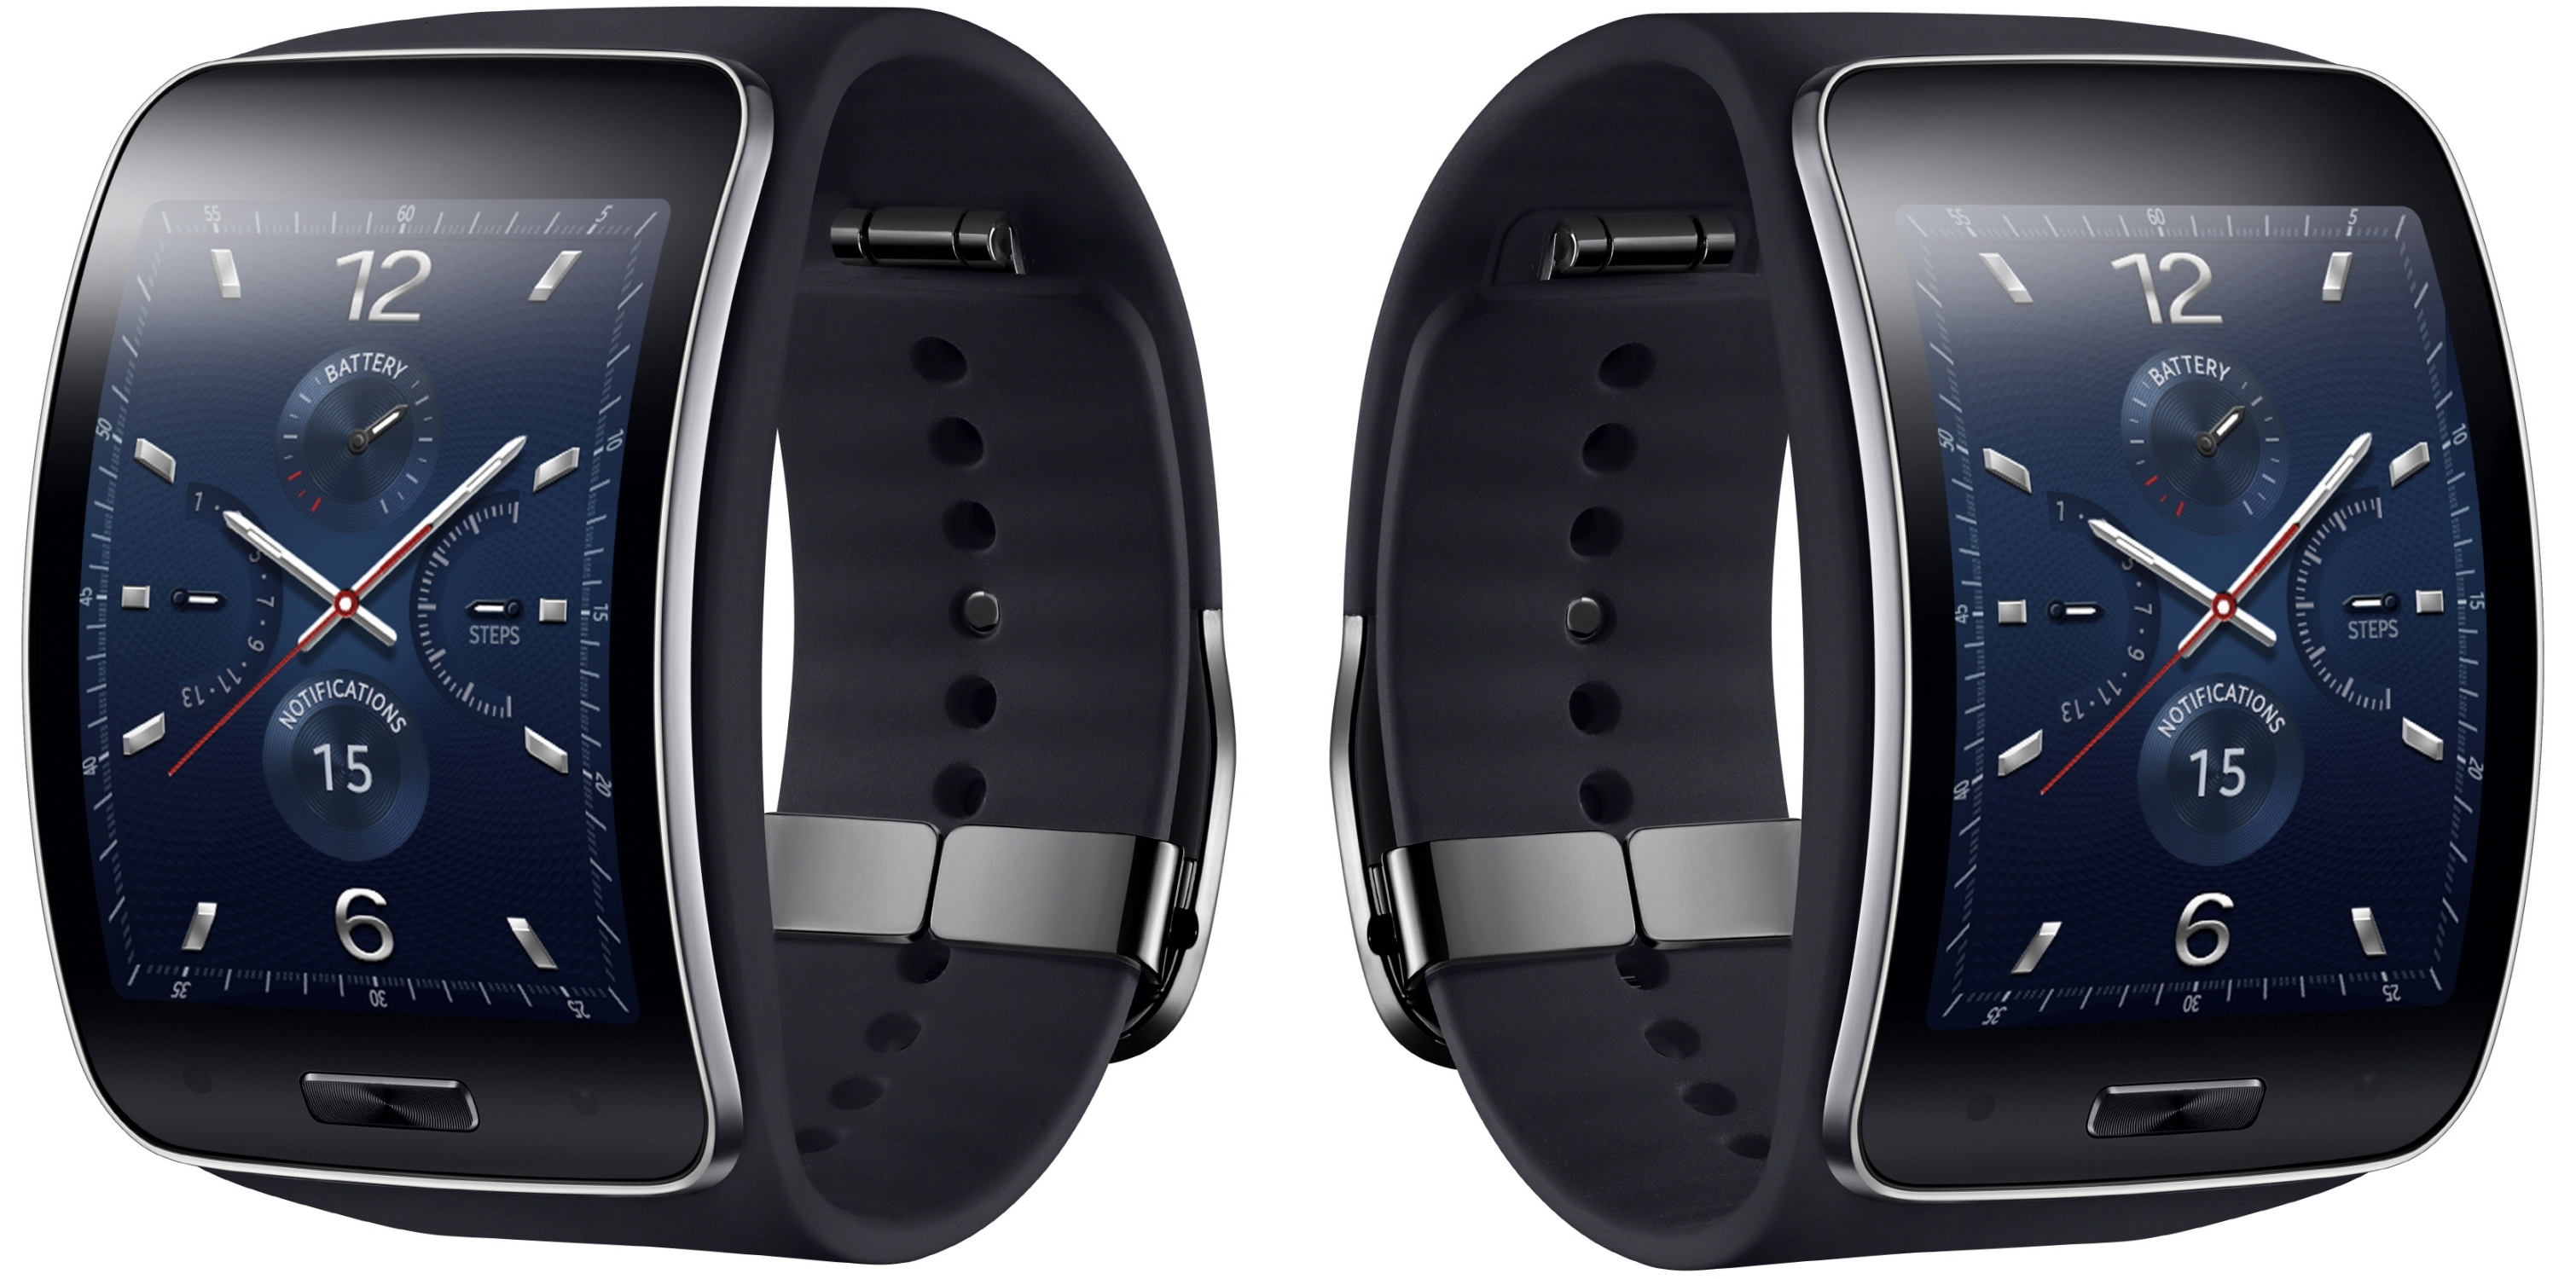 Samsung Gear S See Inside for more Smart Watches | ClickBD